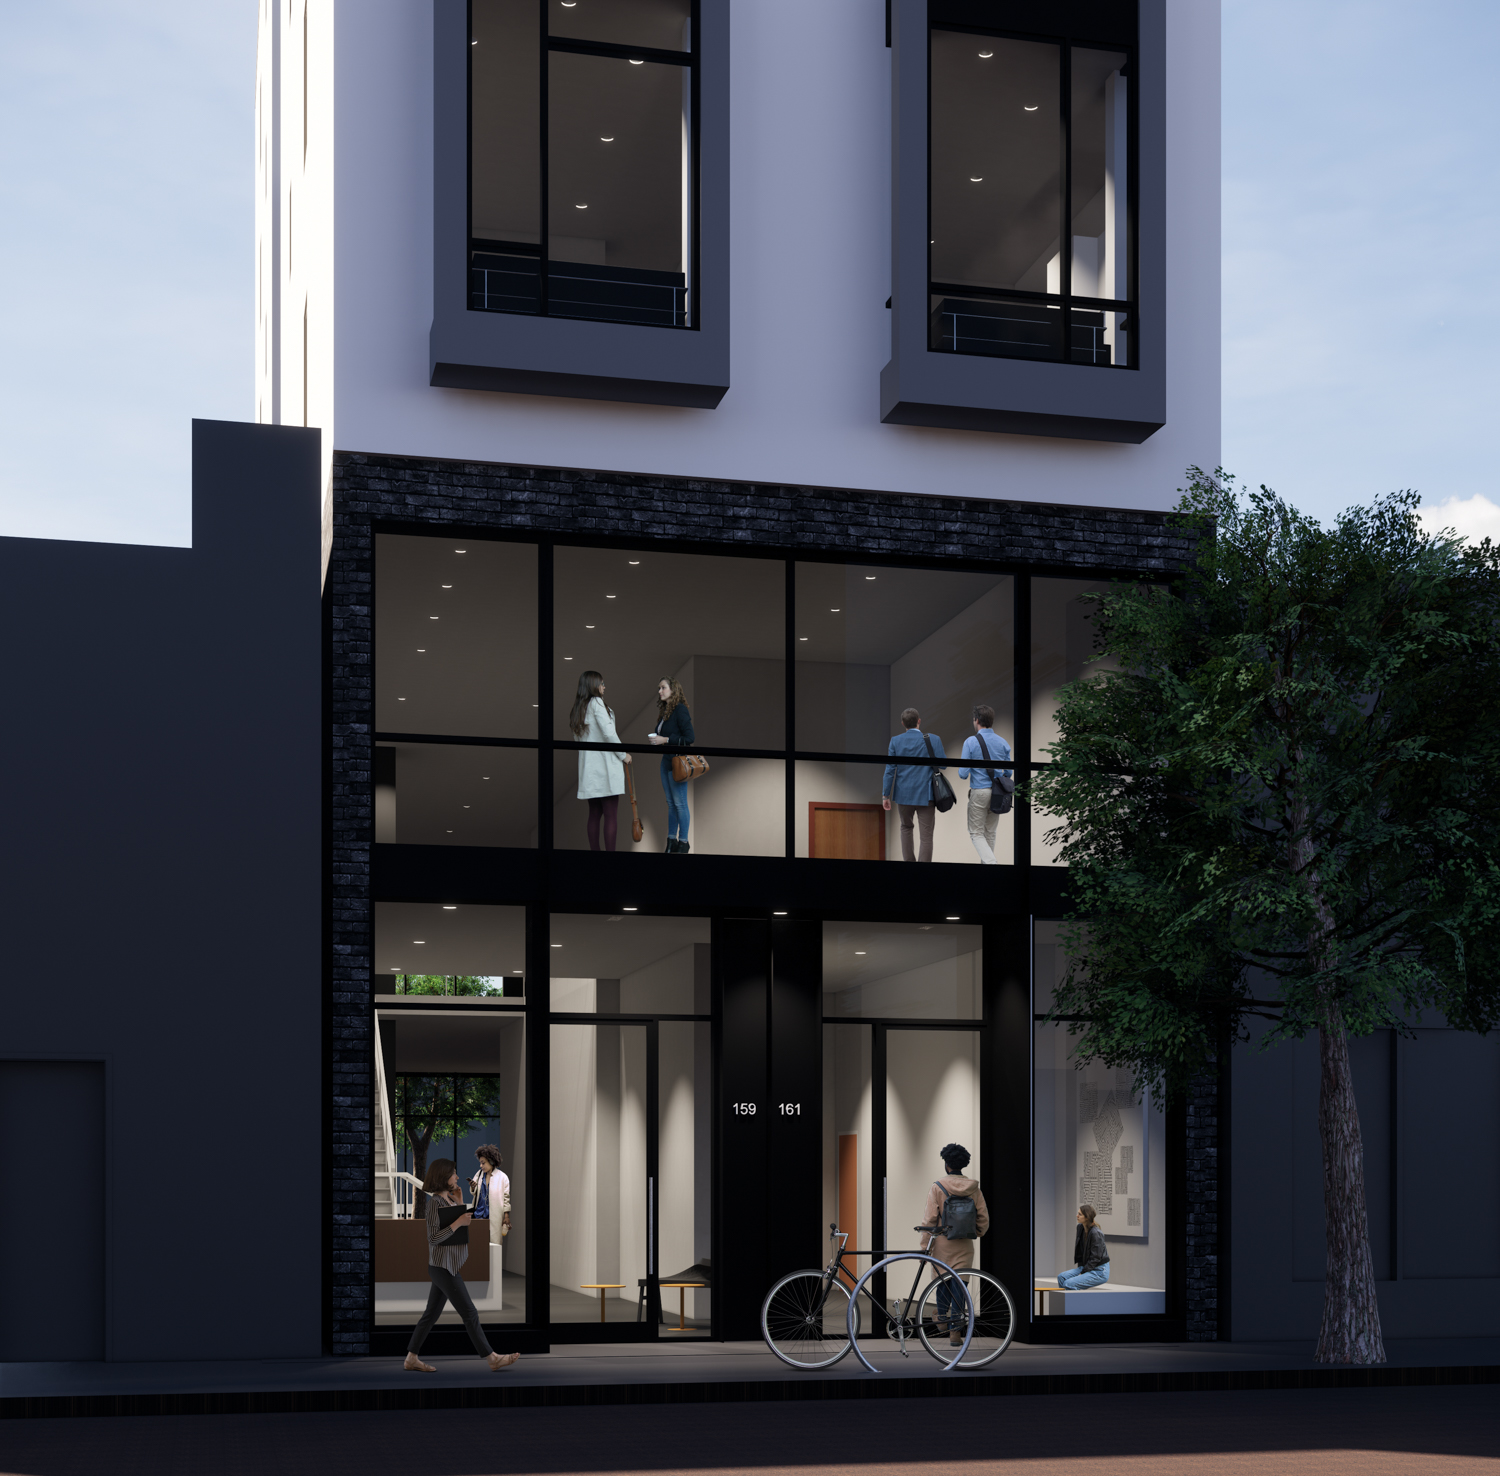 159 Fell Street pedestrian perspective, rendering by Winder Gibson Architects